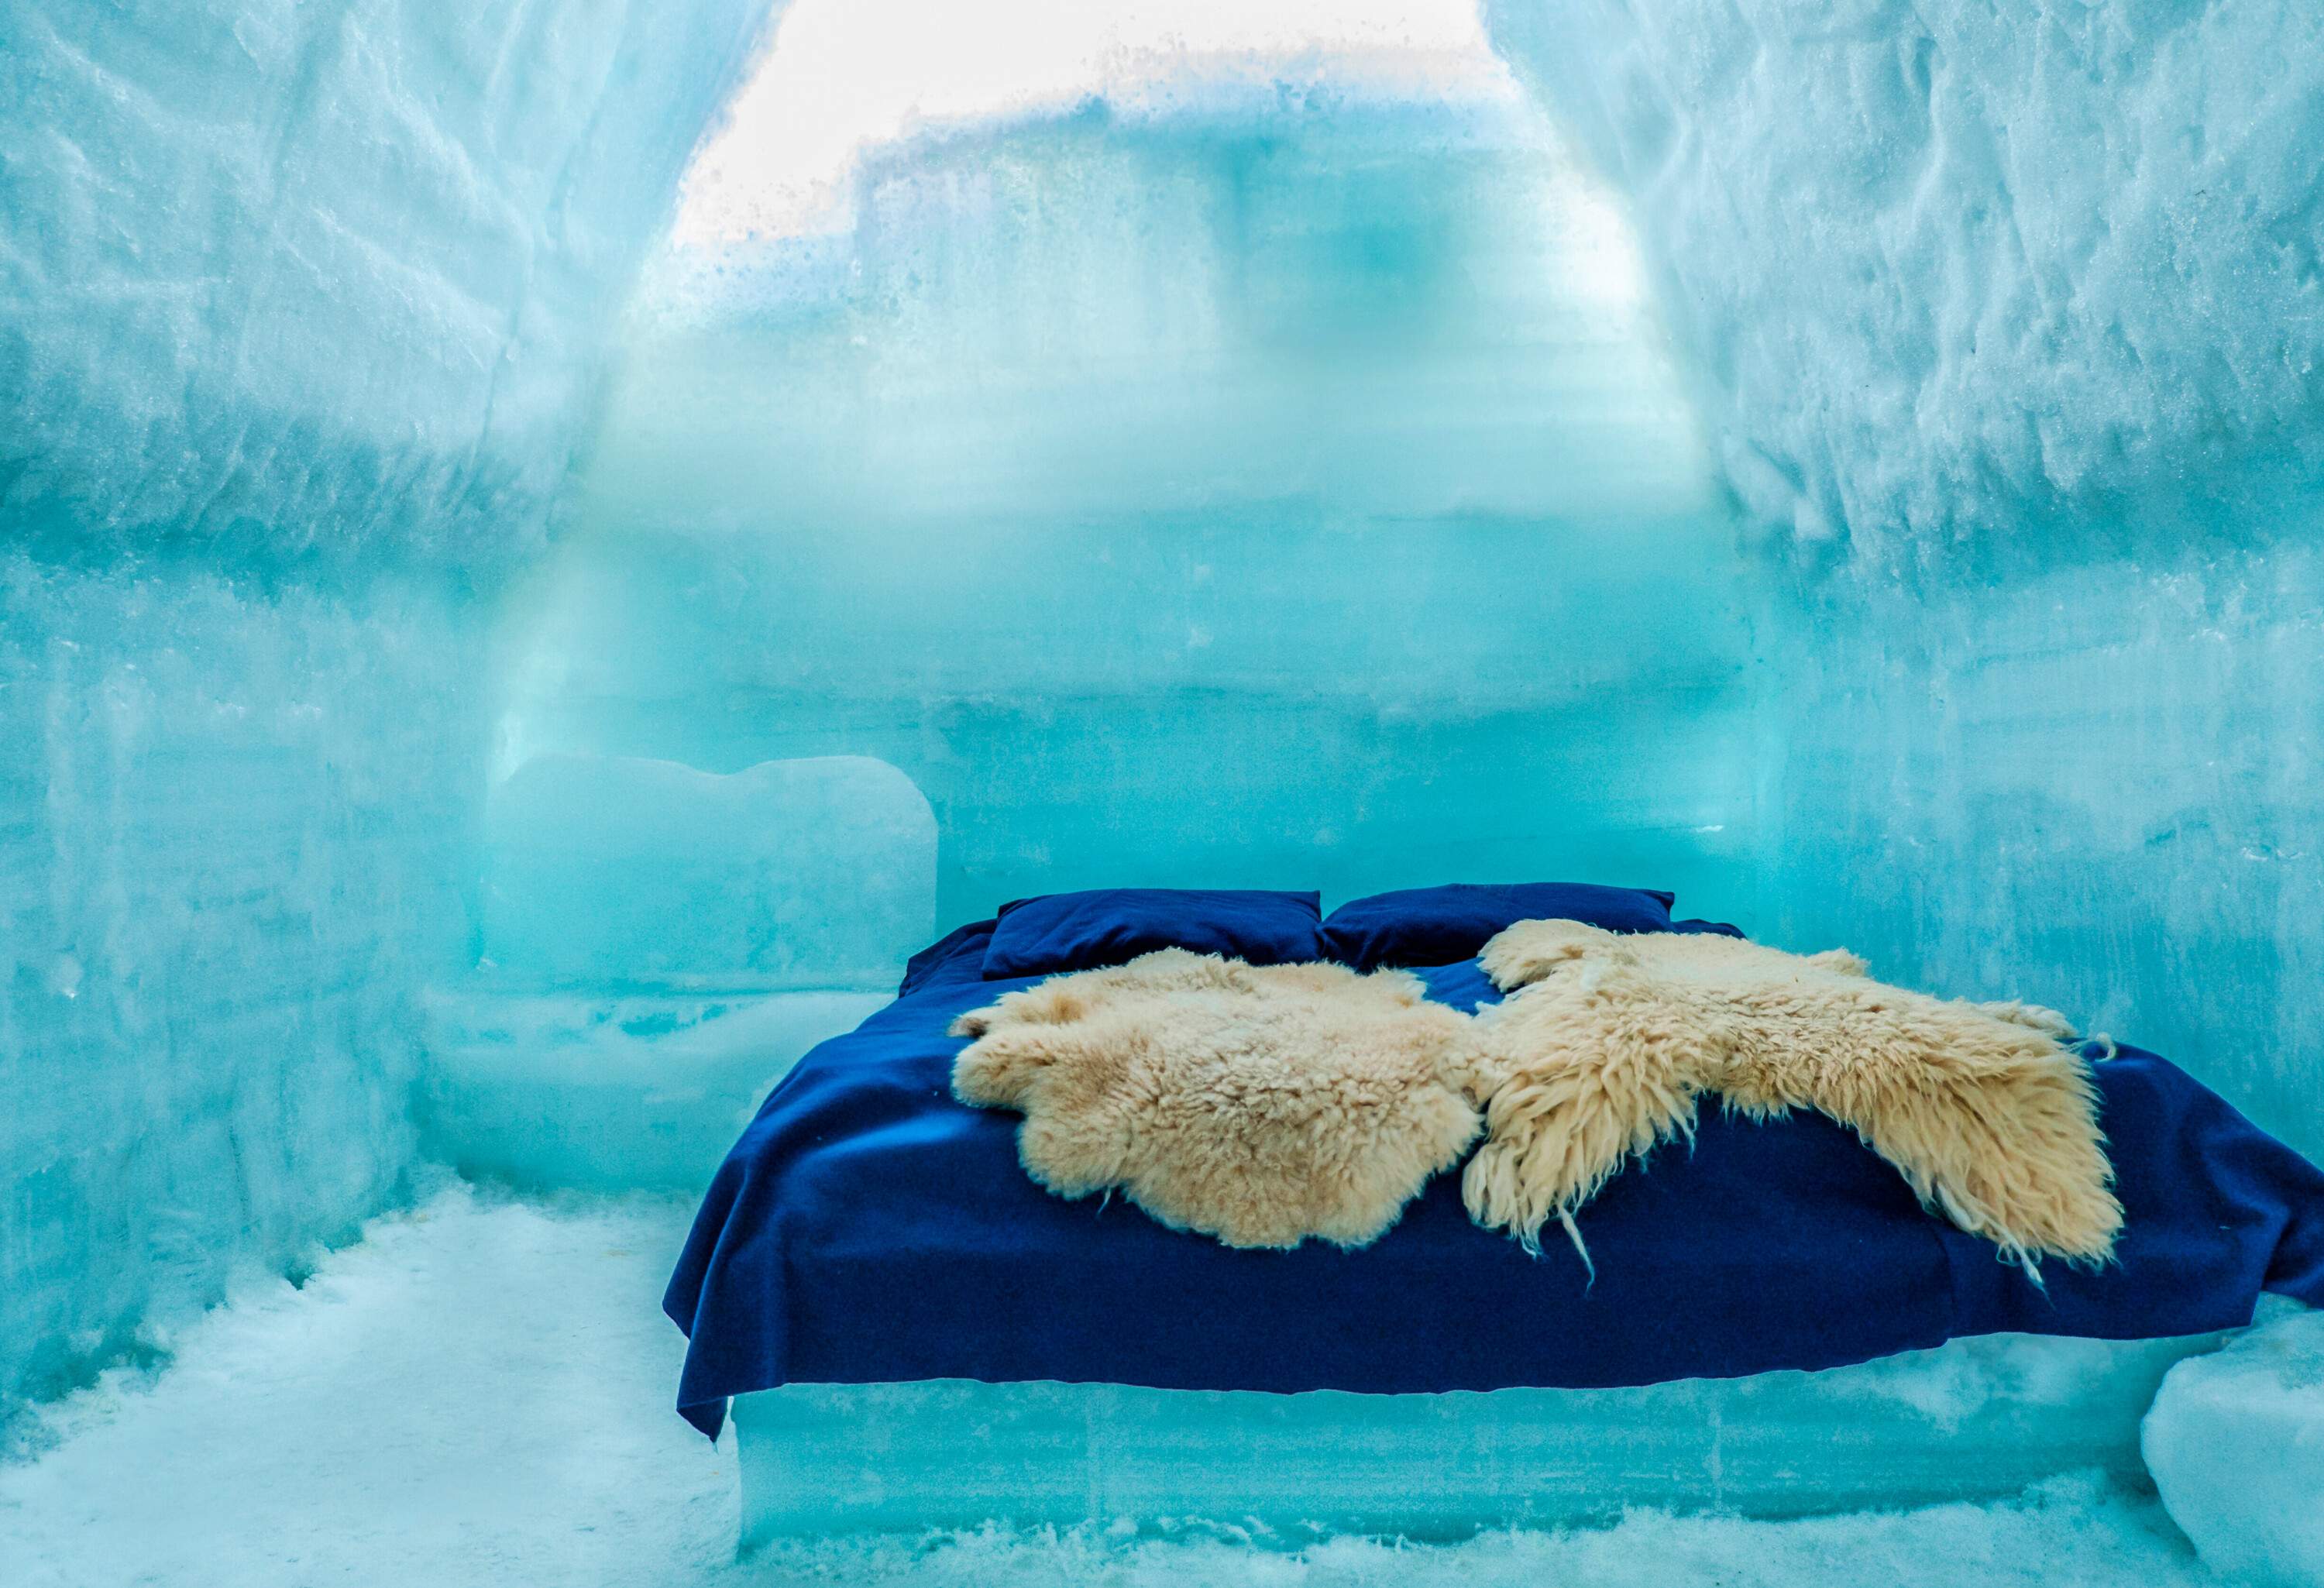 A bed inside an igloo with two beige furs, blue flat sheets and pillows.